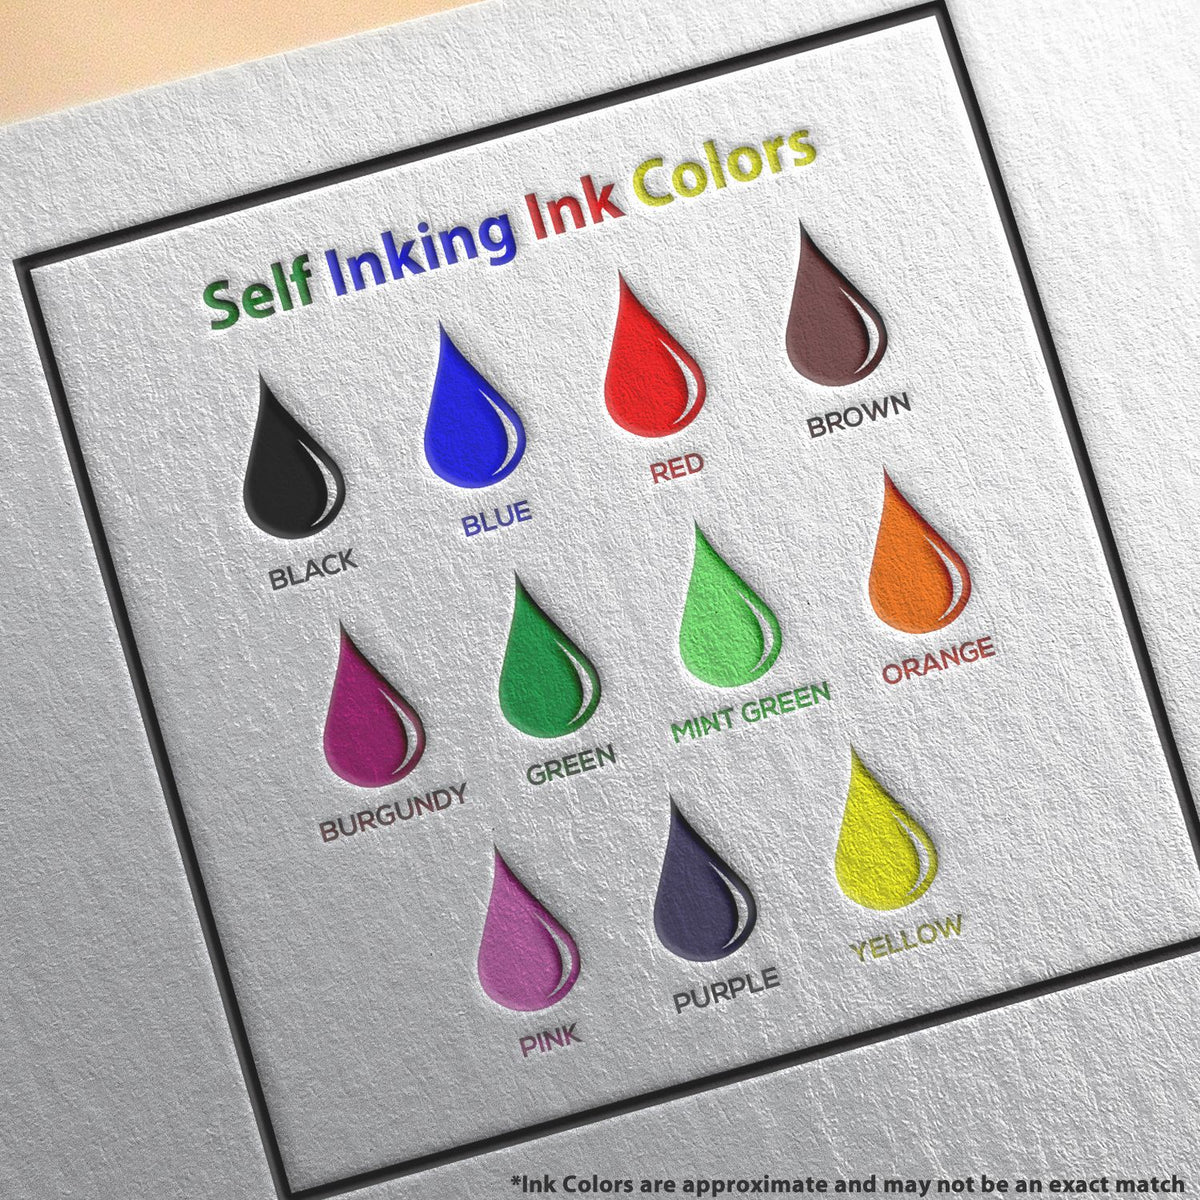 A picture showing the different ink colors or hues available for the Self-Inking Pennsylvania Landscape Architect Stamp product.